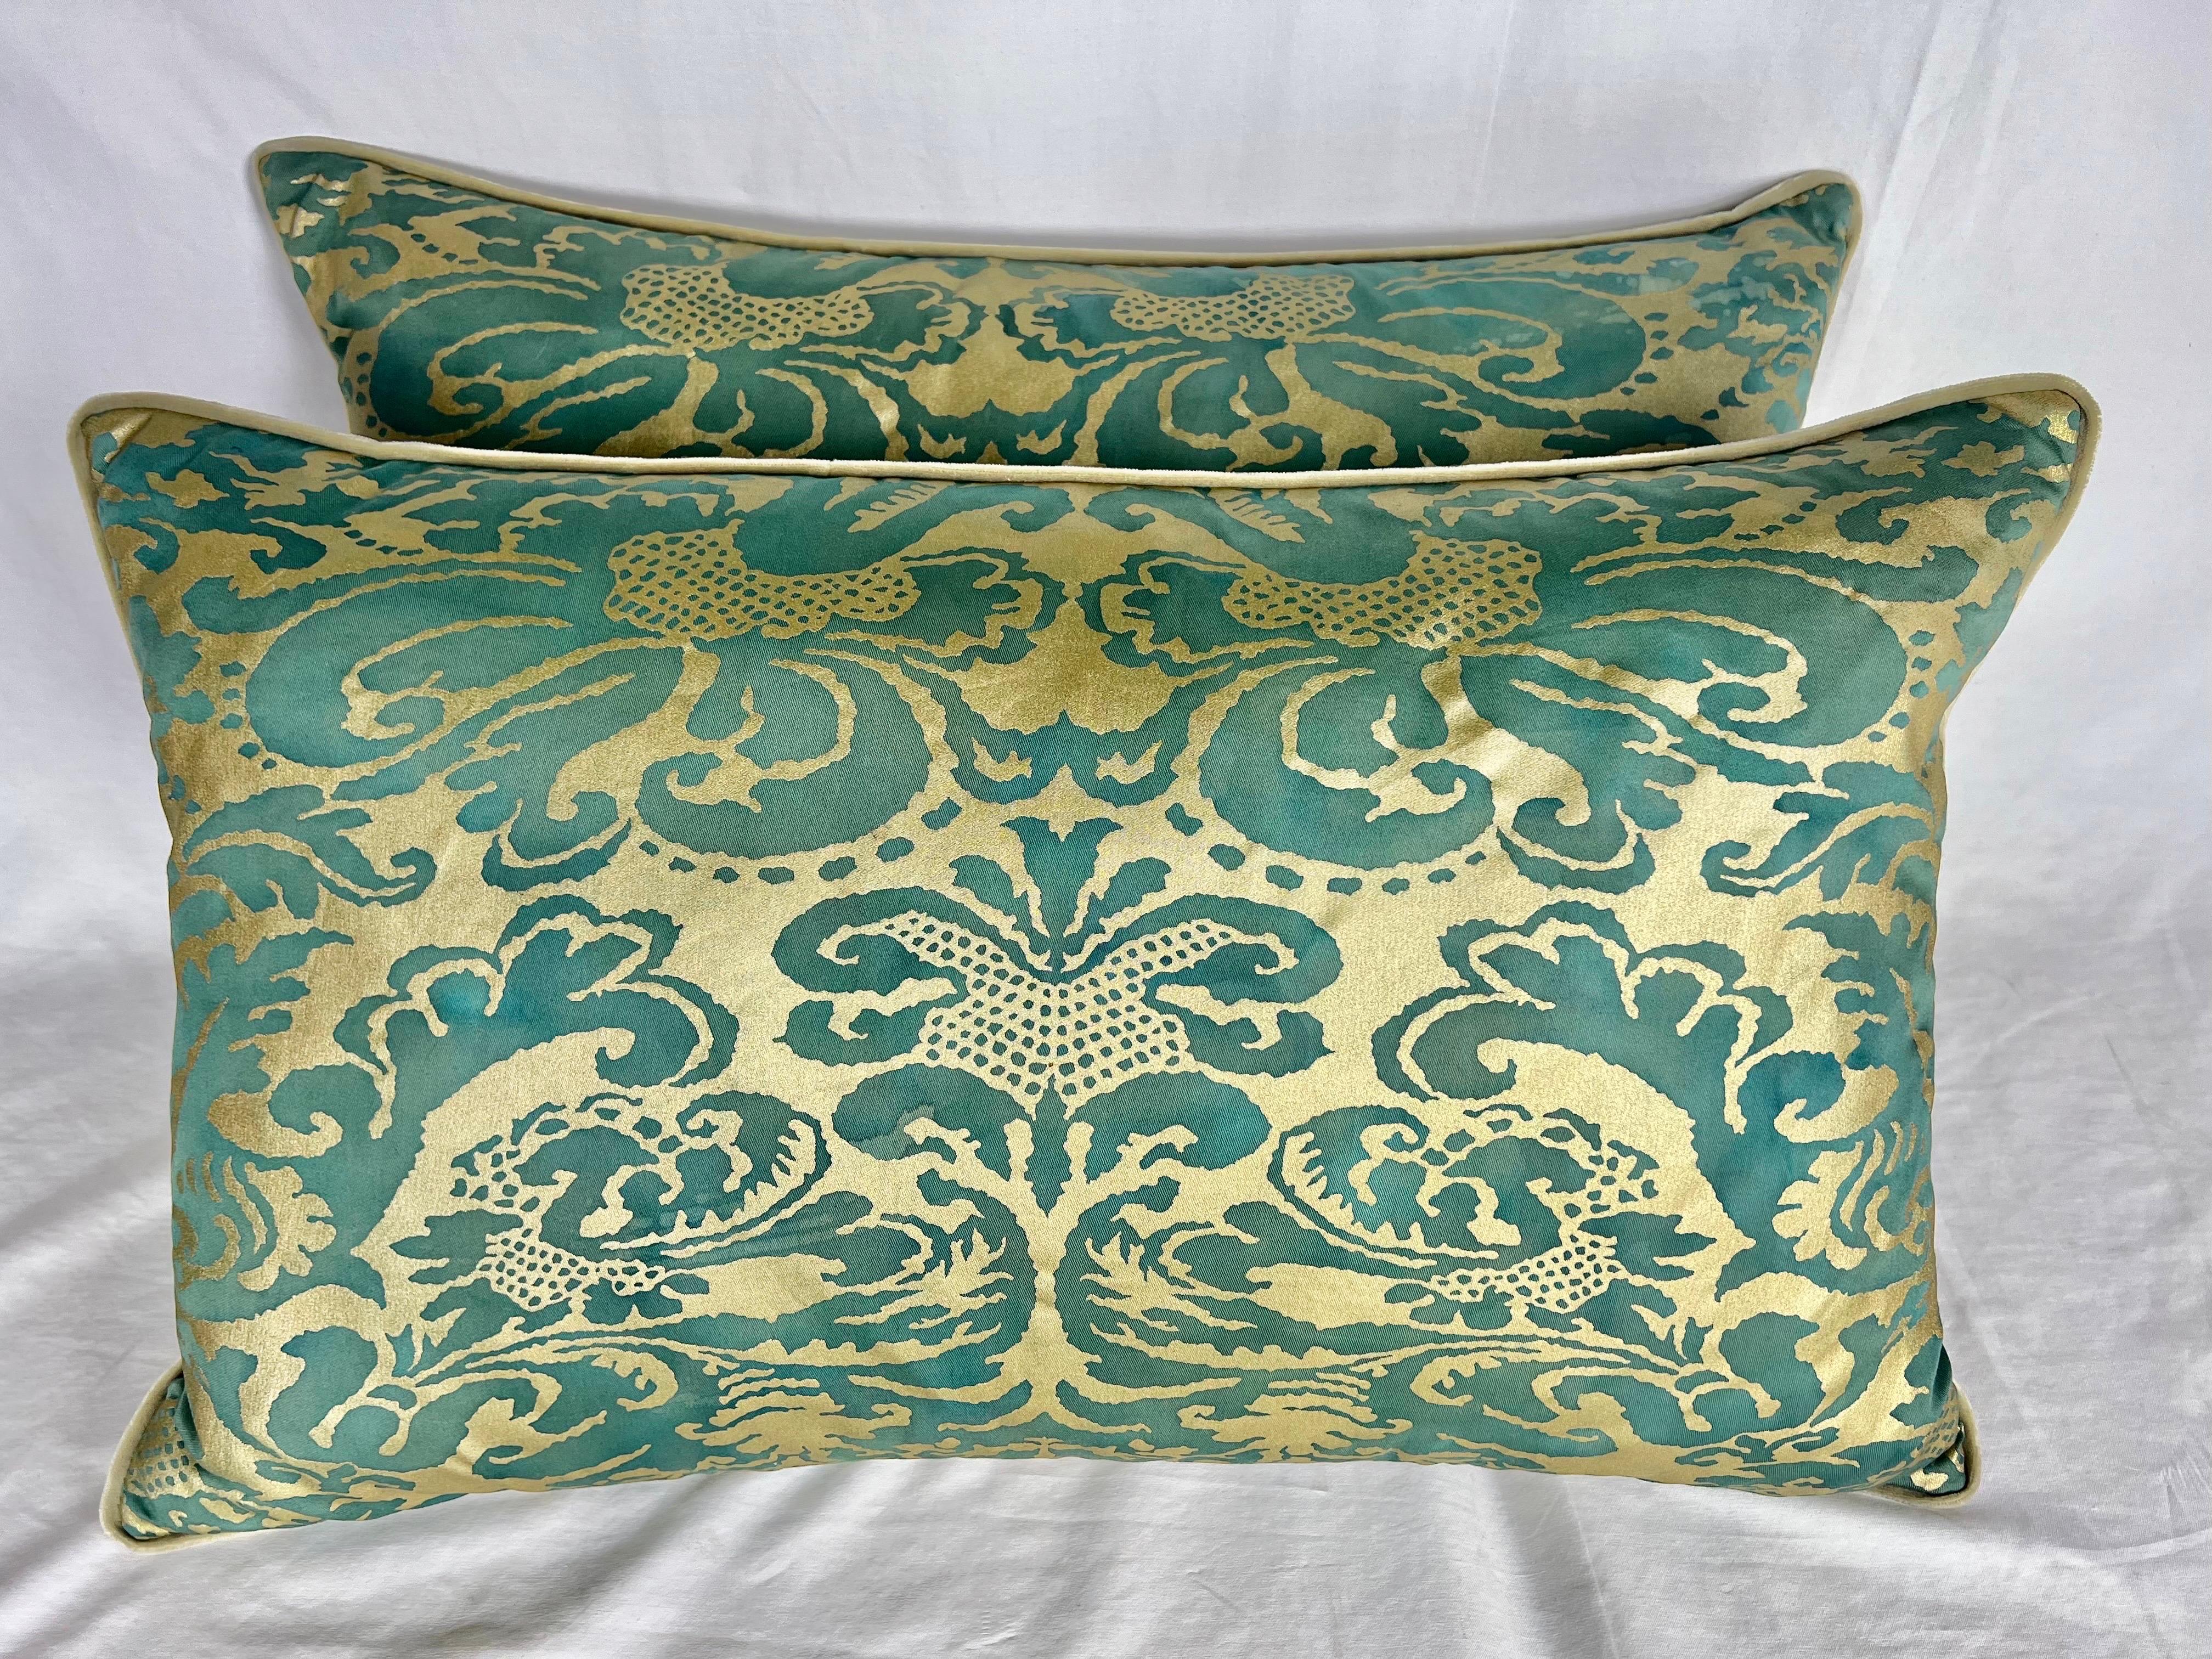 Pair of Italian Fortuny Pillows in a teal green & metallic gold coloration. There is a neutral cream color on the backs with a self cord detail. Down insert.